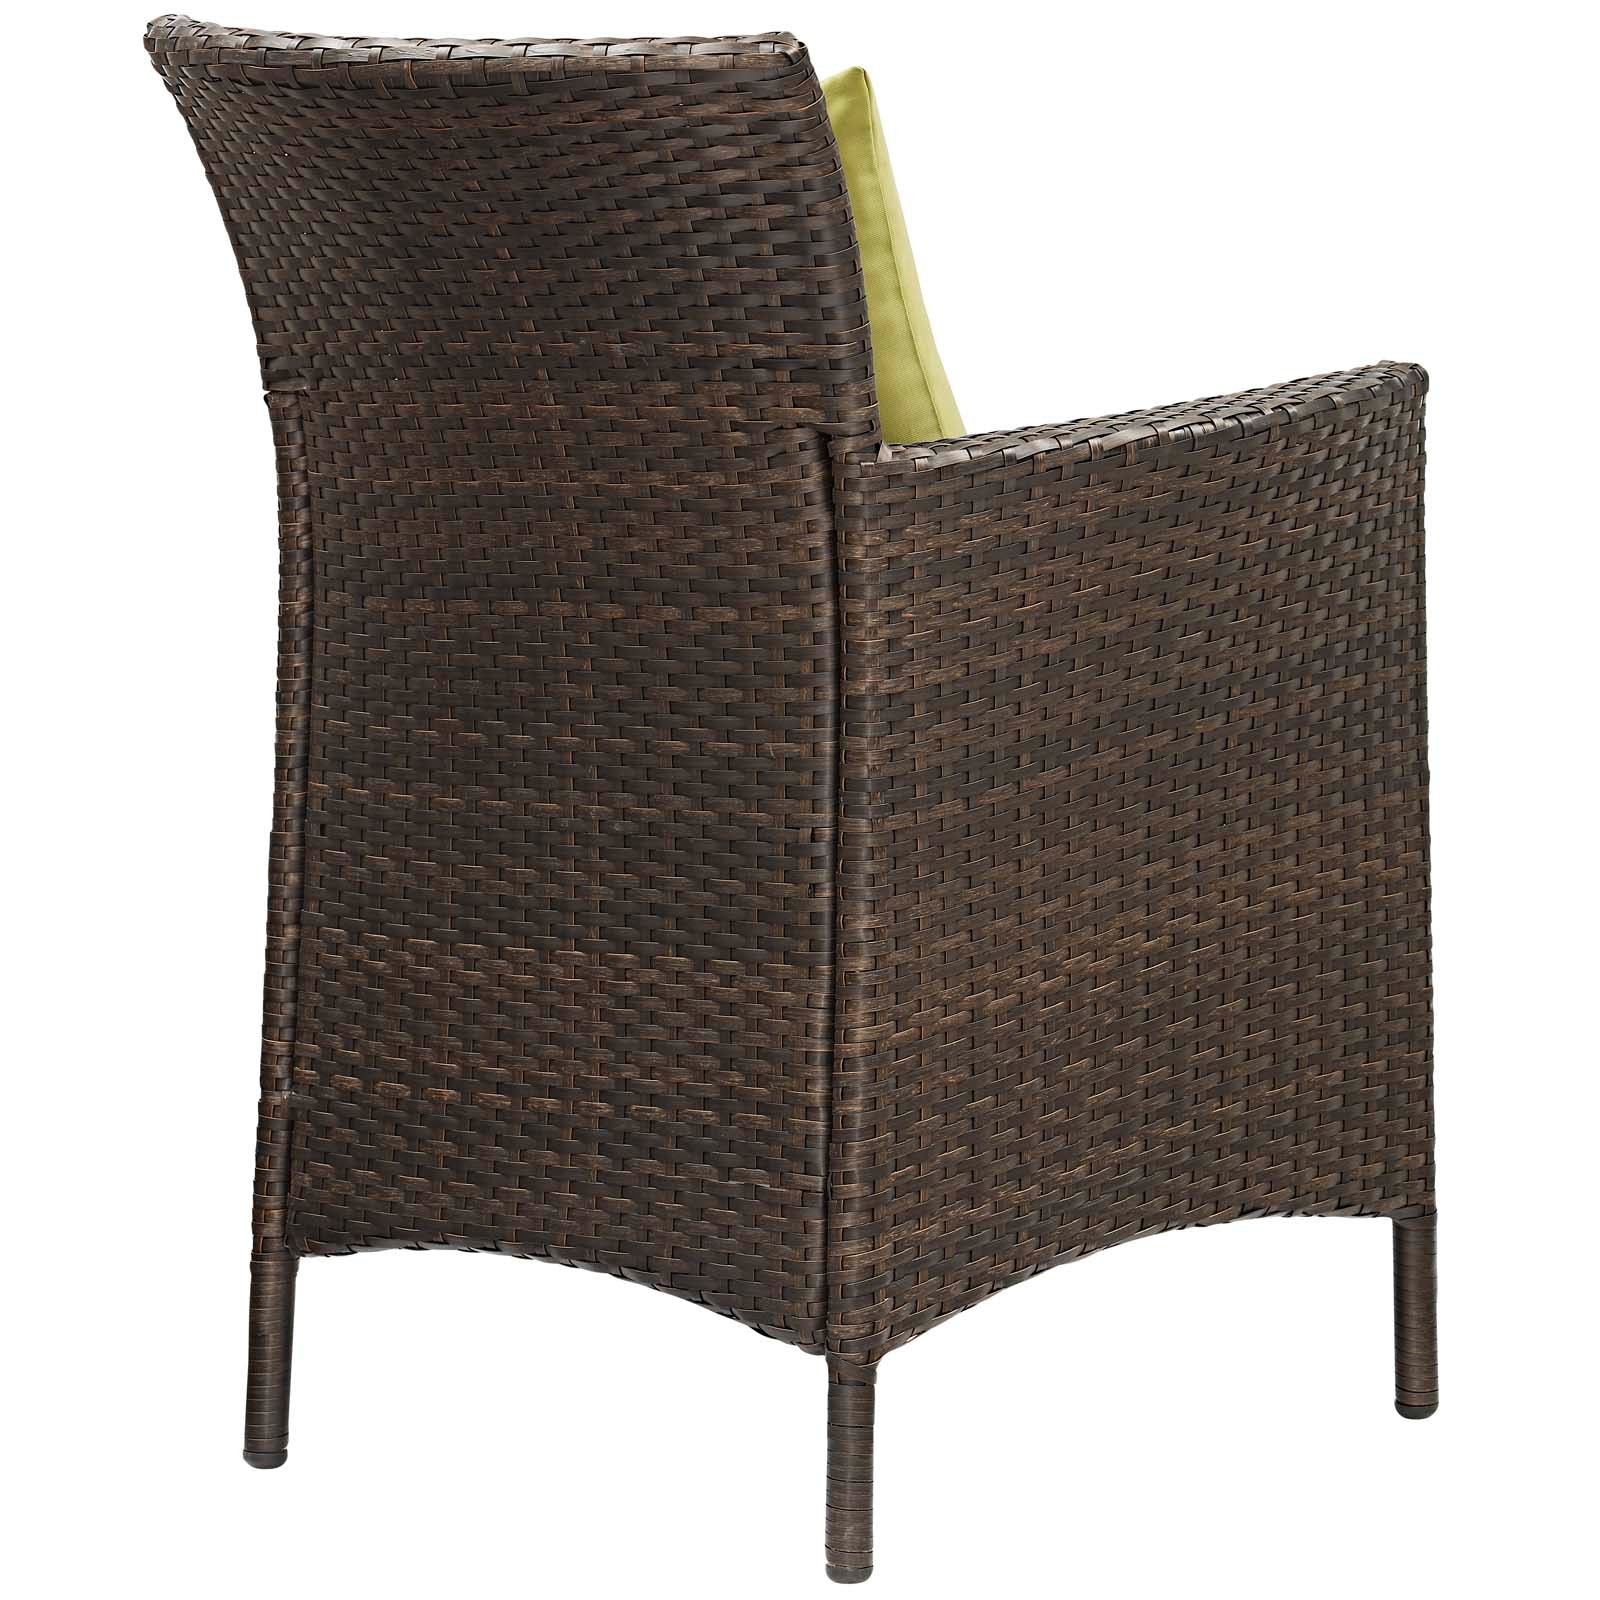 Modway Outdoor Dining Sets - Conduit 7 Piece Outdoor Patio Wicker Rattan Dining Set Brown Peridot